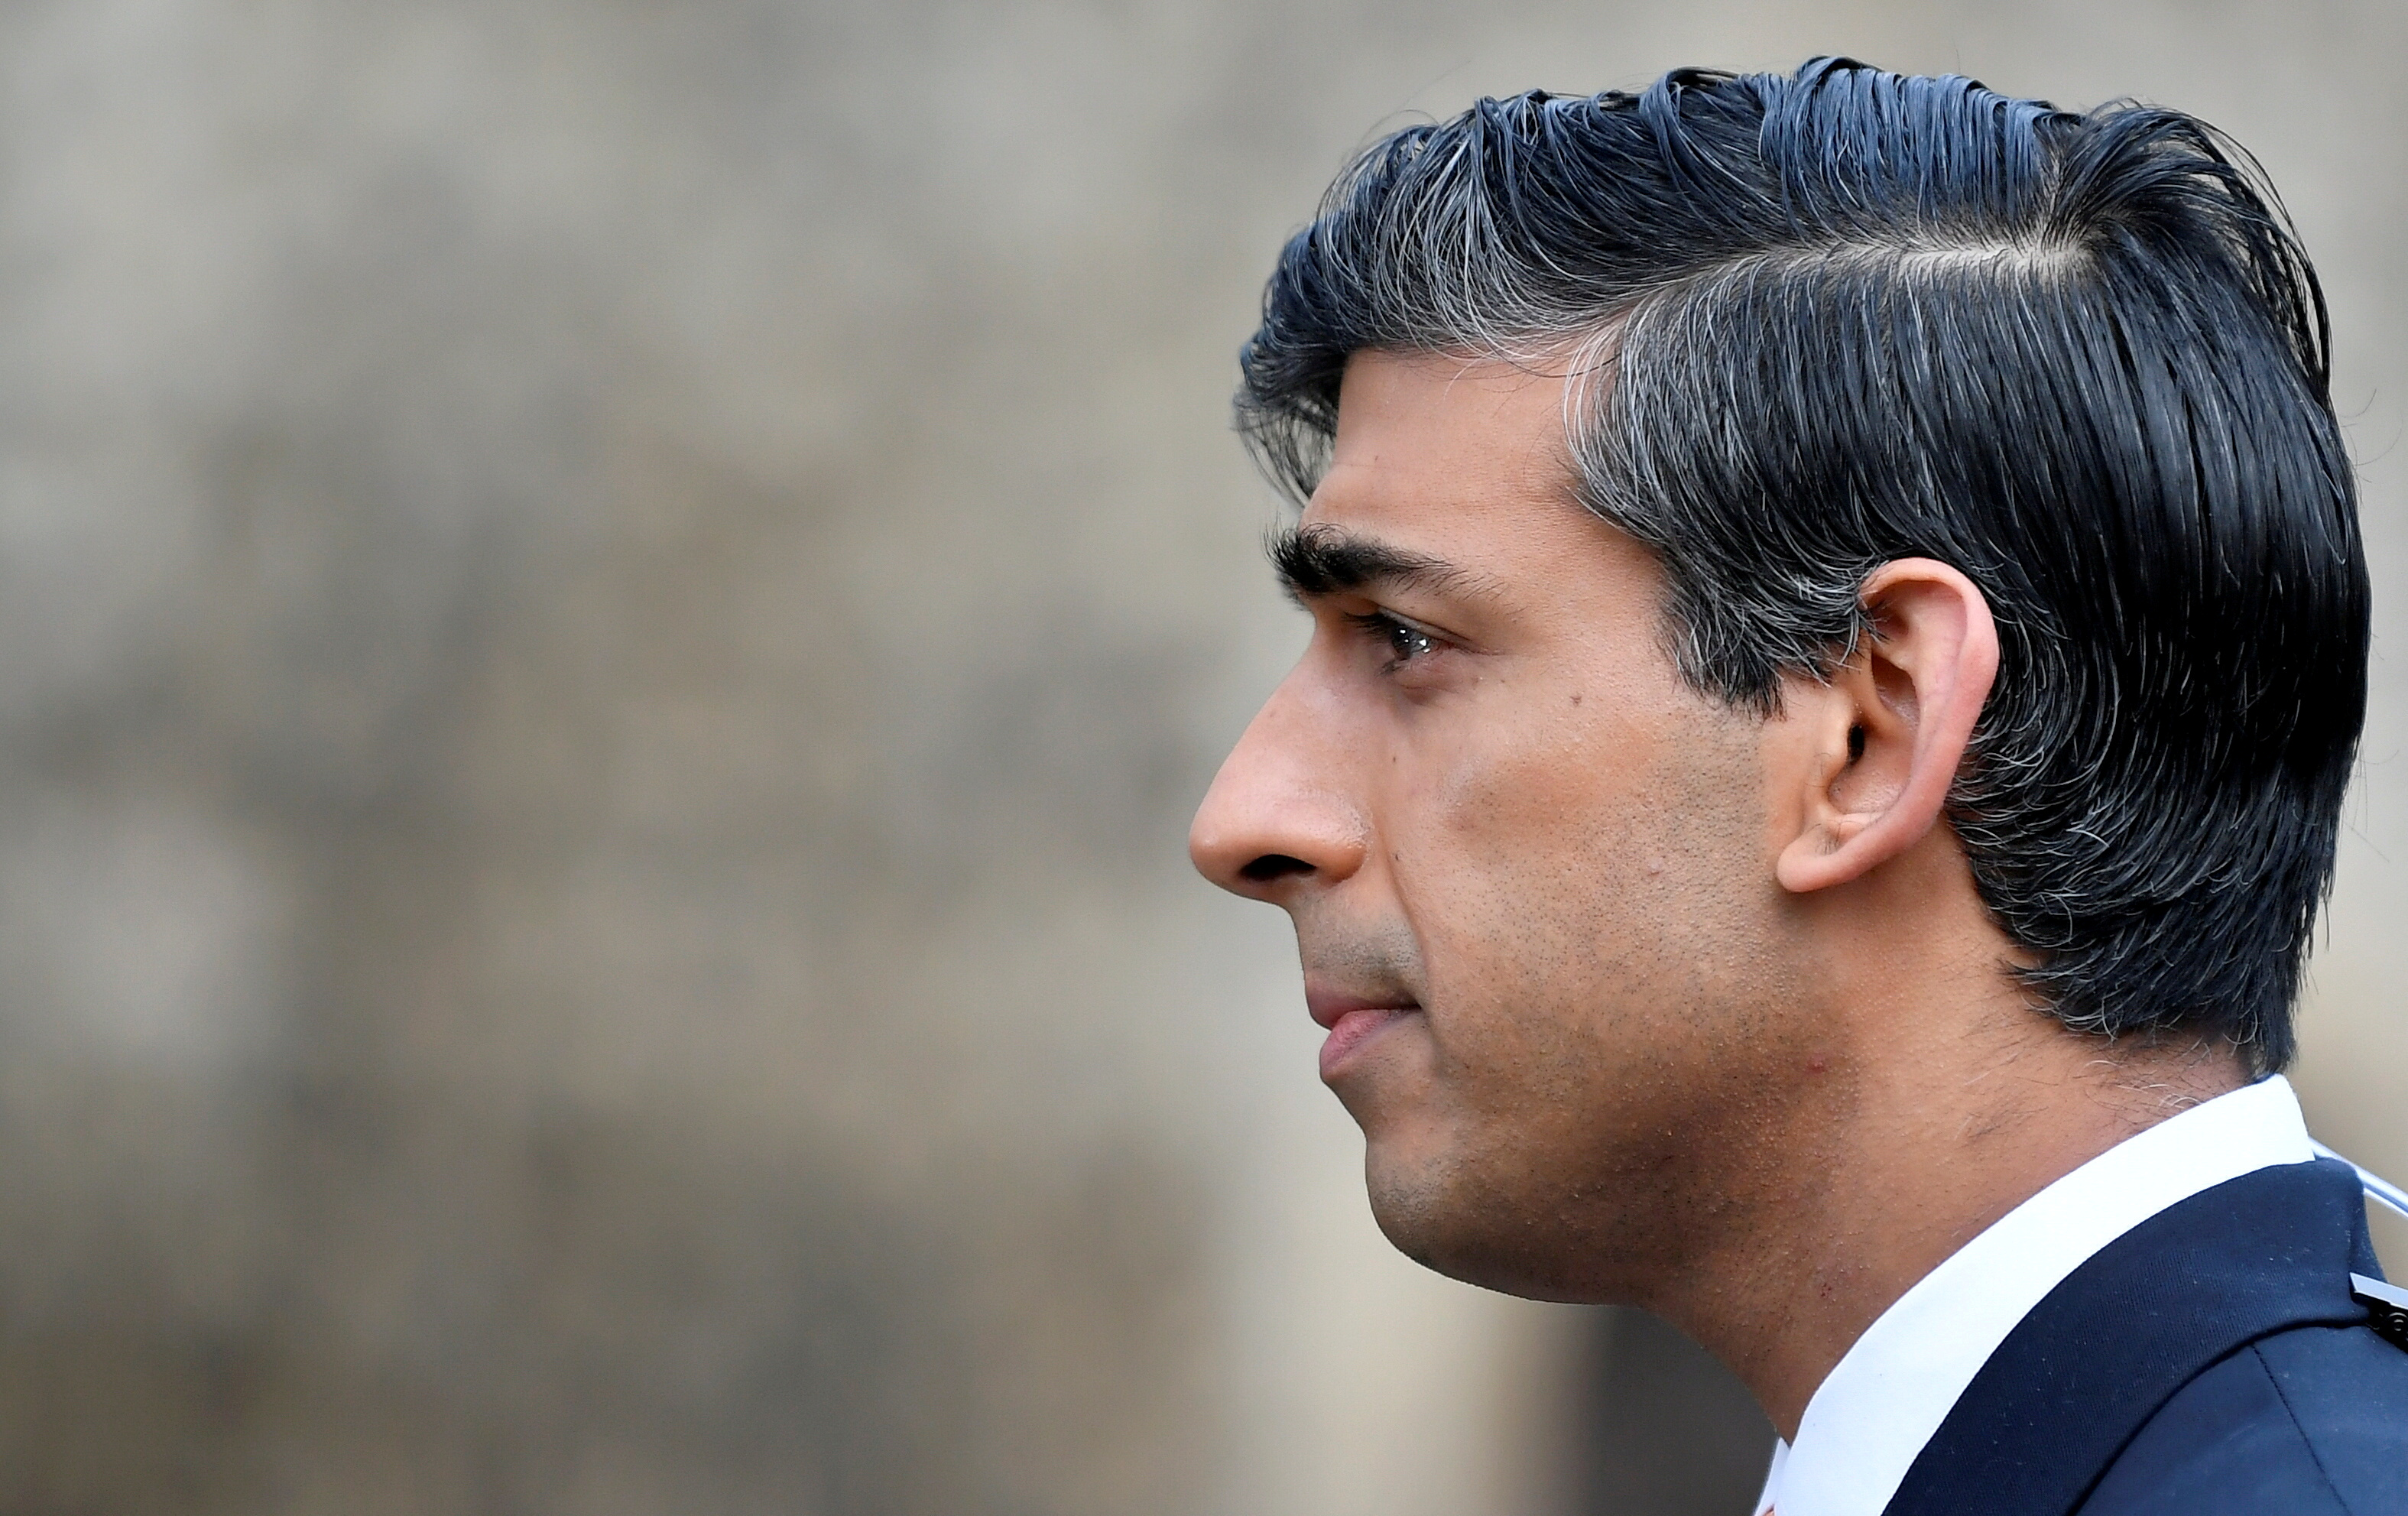 Britain's Chancellor of the Exchequer Rishi Sunak in London, Britain, November 26, 2020. REUTERS/Toby Melville/File Photo